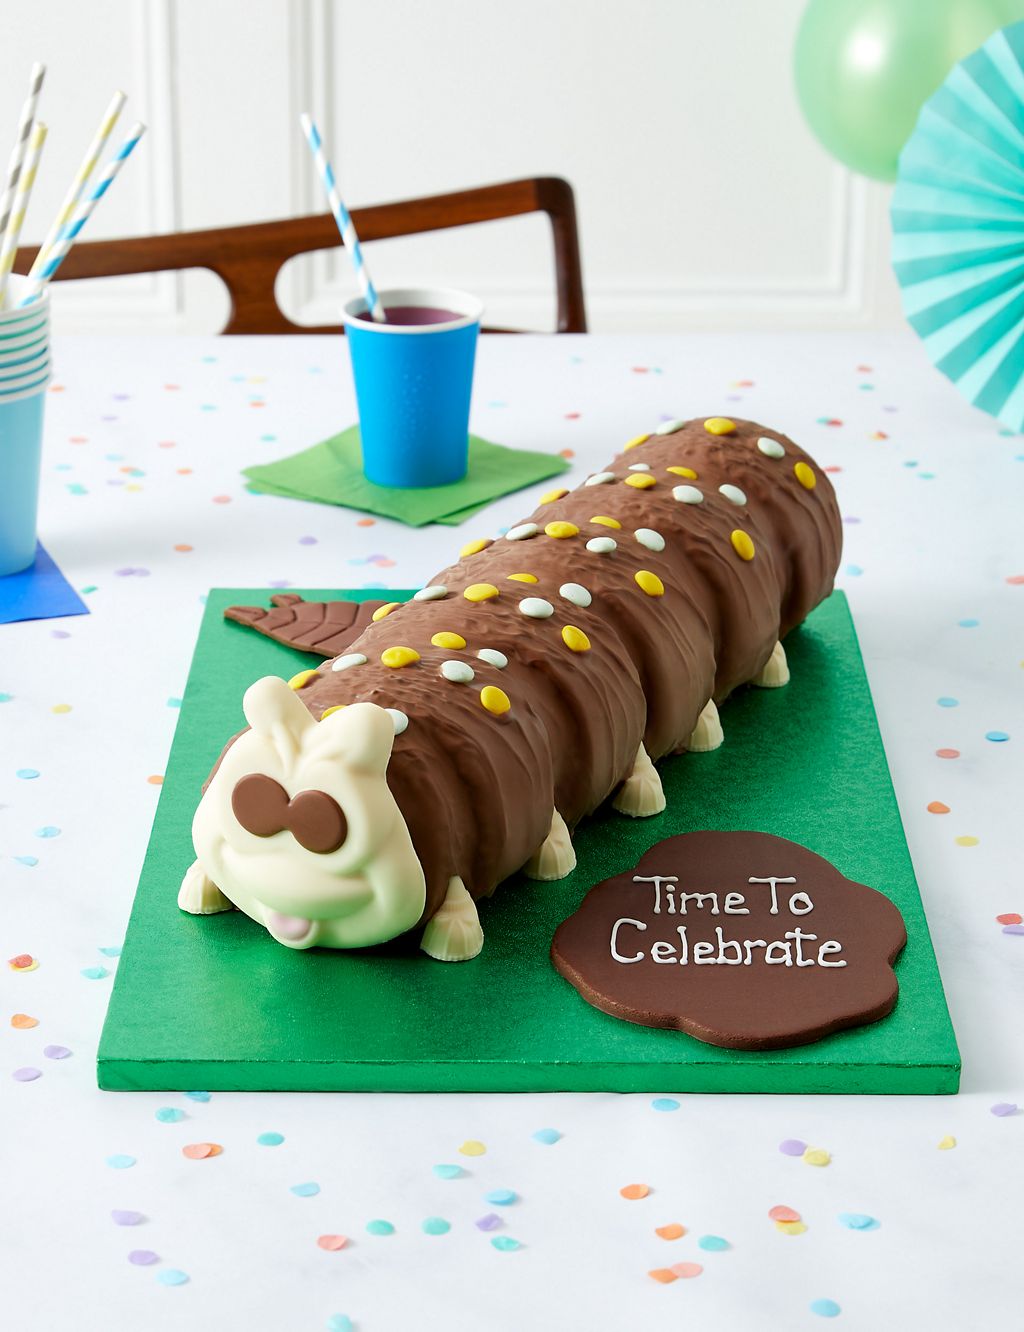 Personalised Giant Colin the Caterpillar™ Cake (Serves 40) 1 of 10